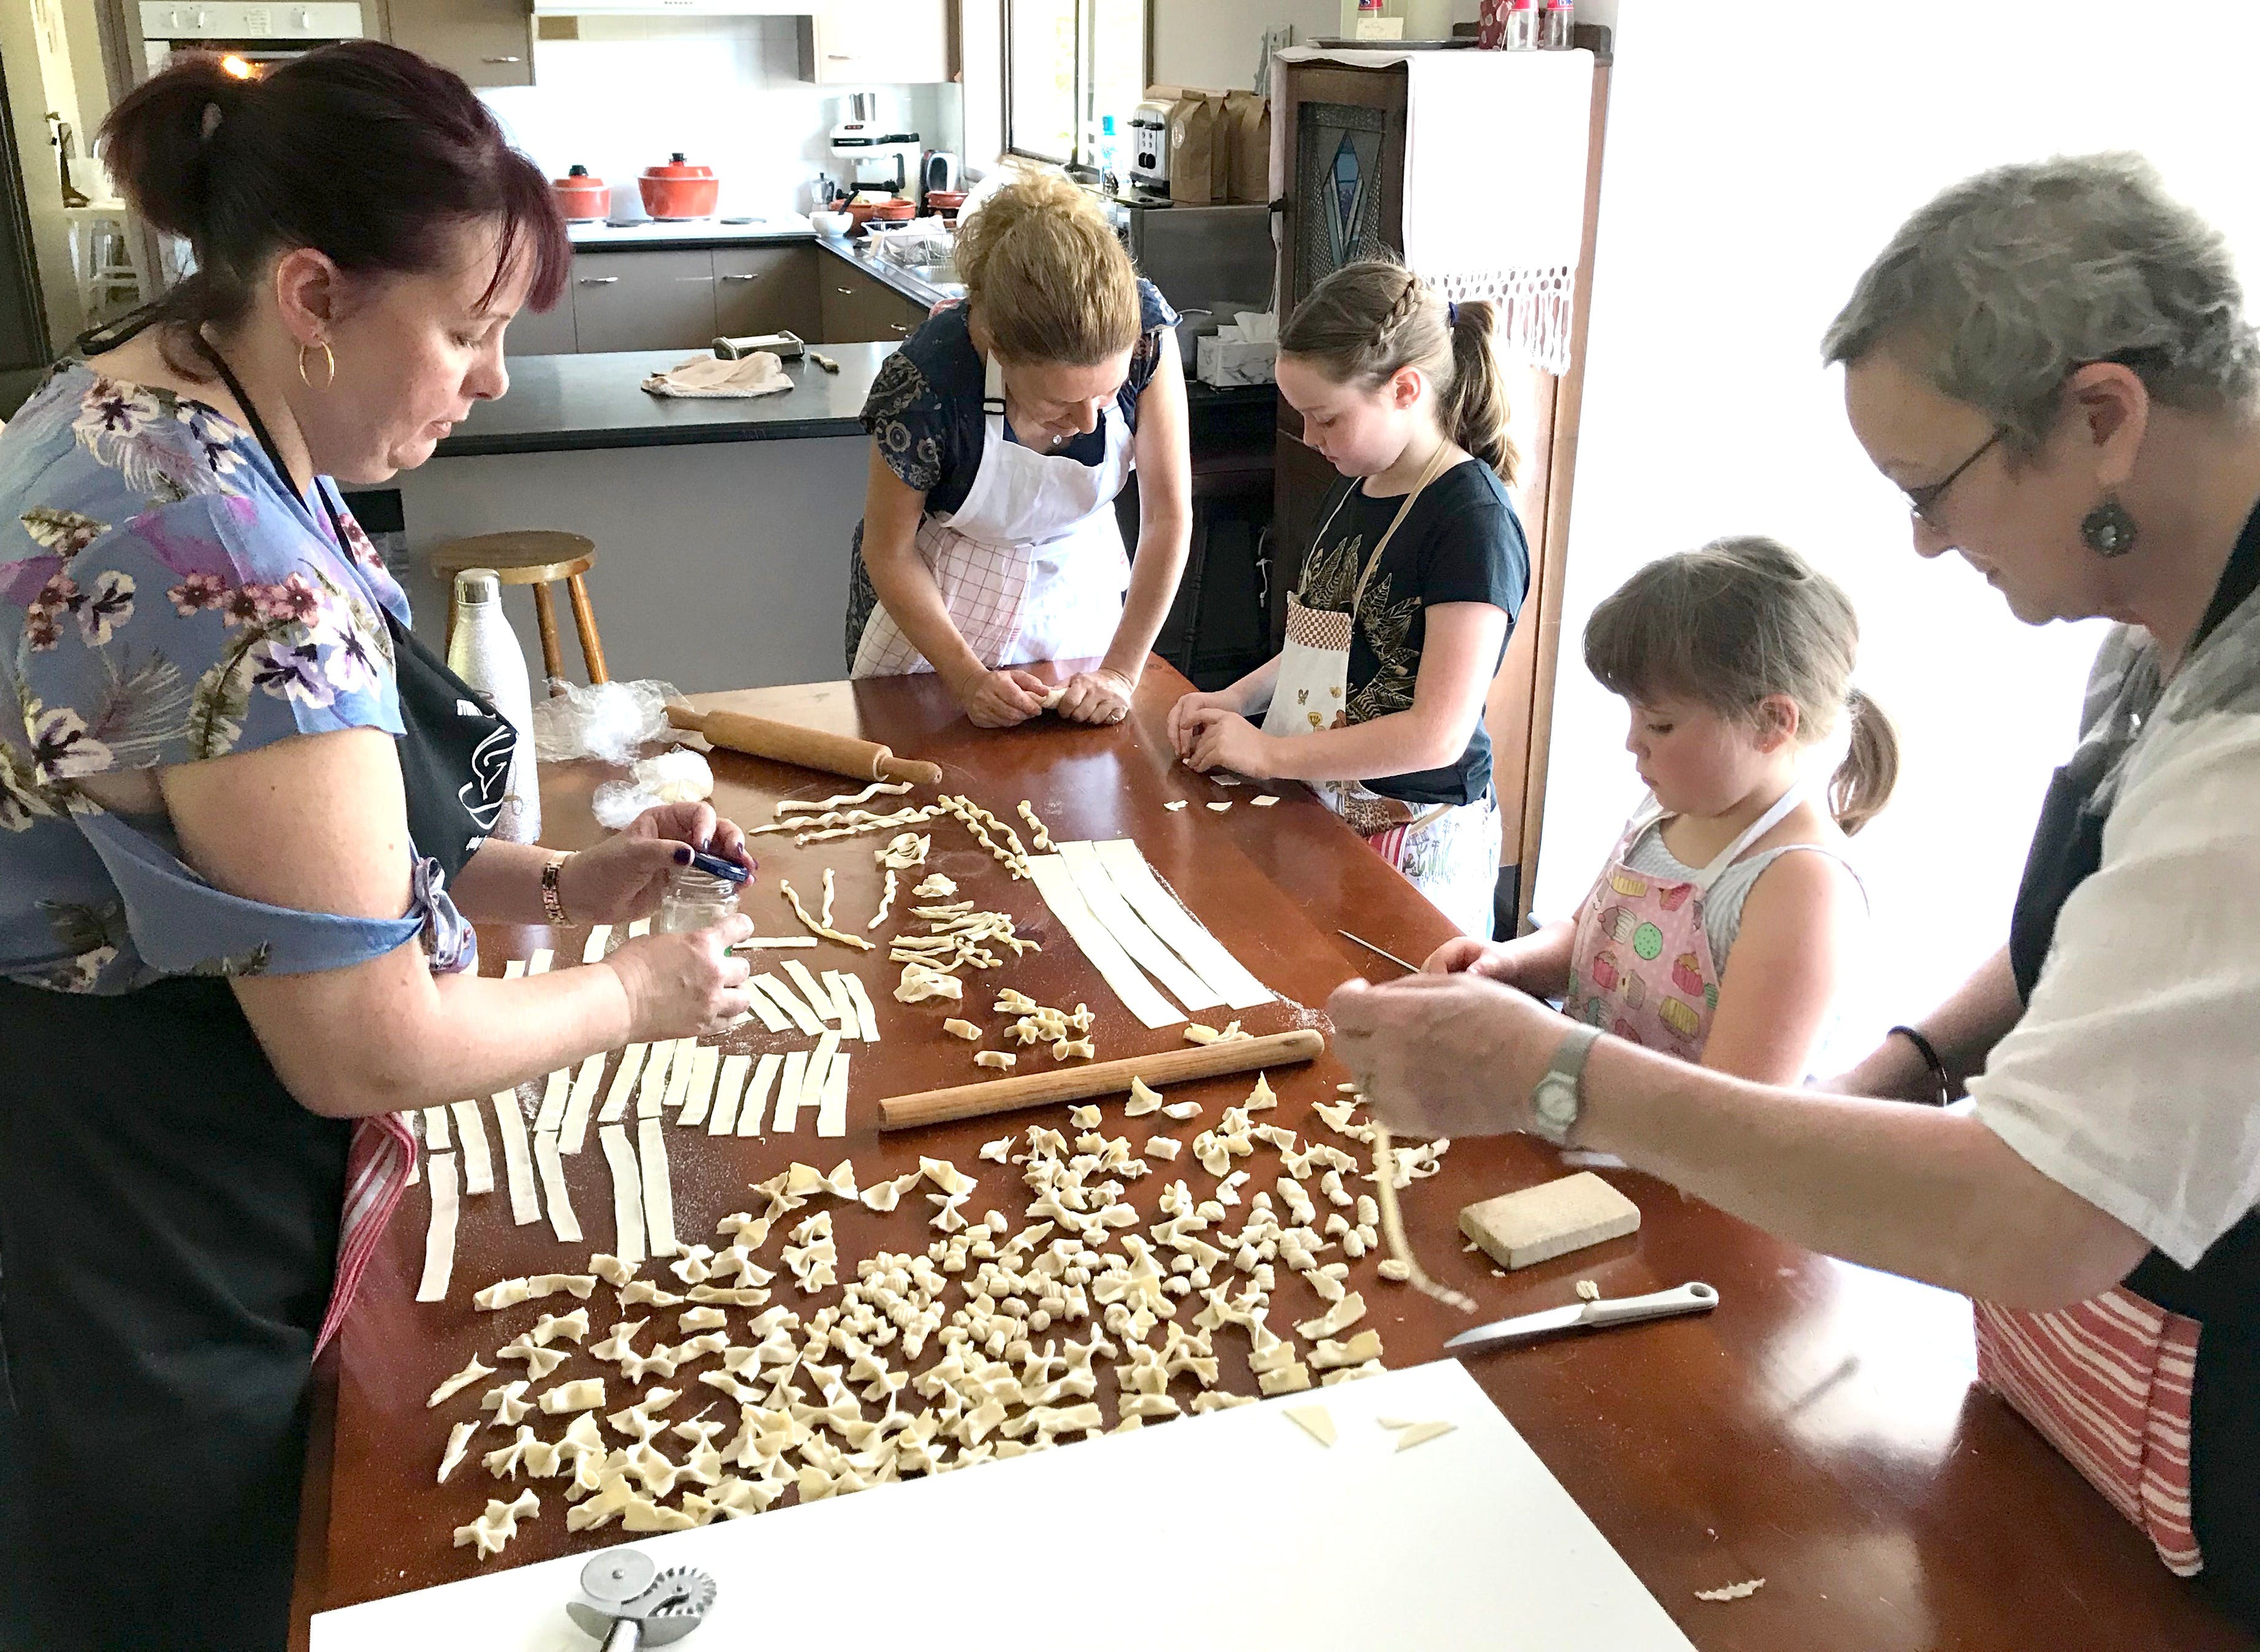 Kids Pasta Making Class - hands on fun at your house - Kingaroy Accommodation